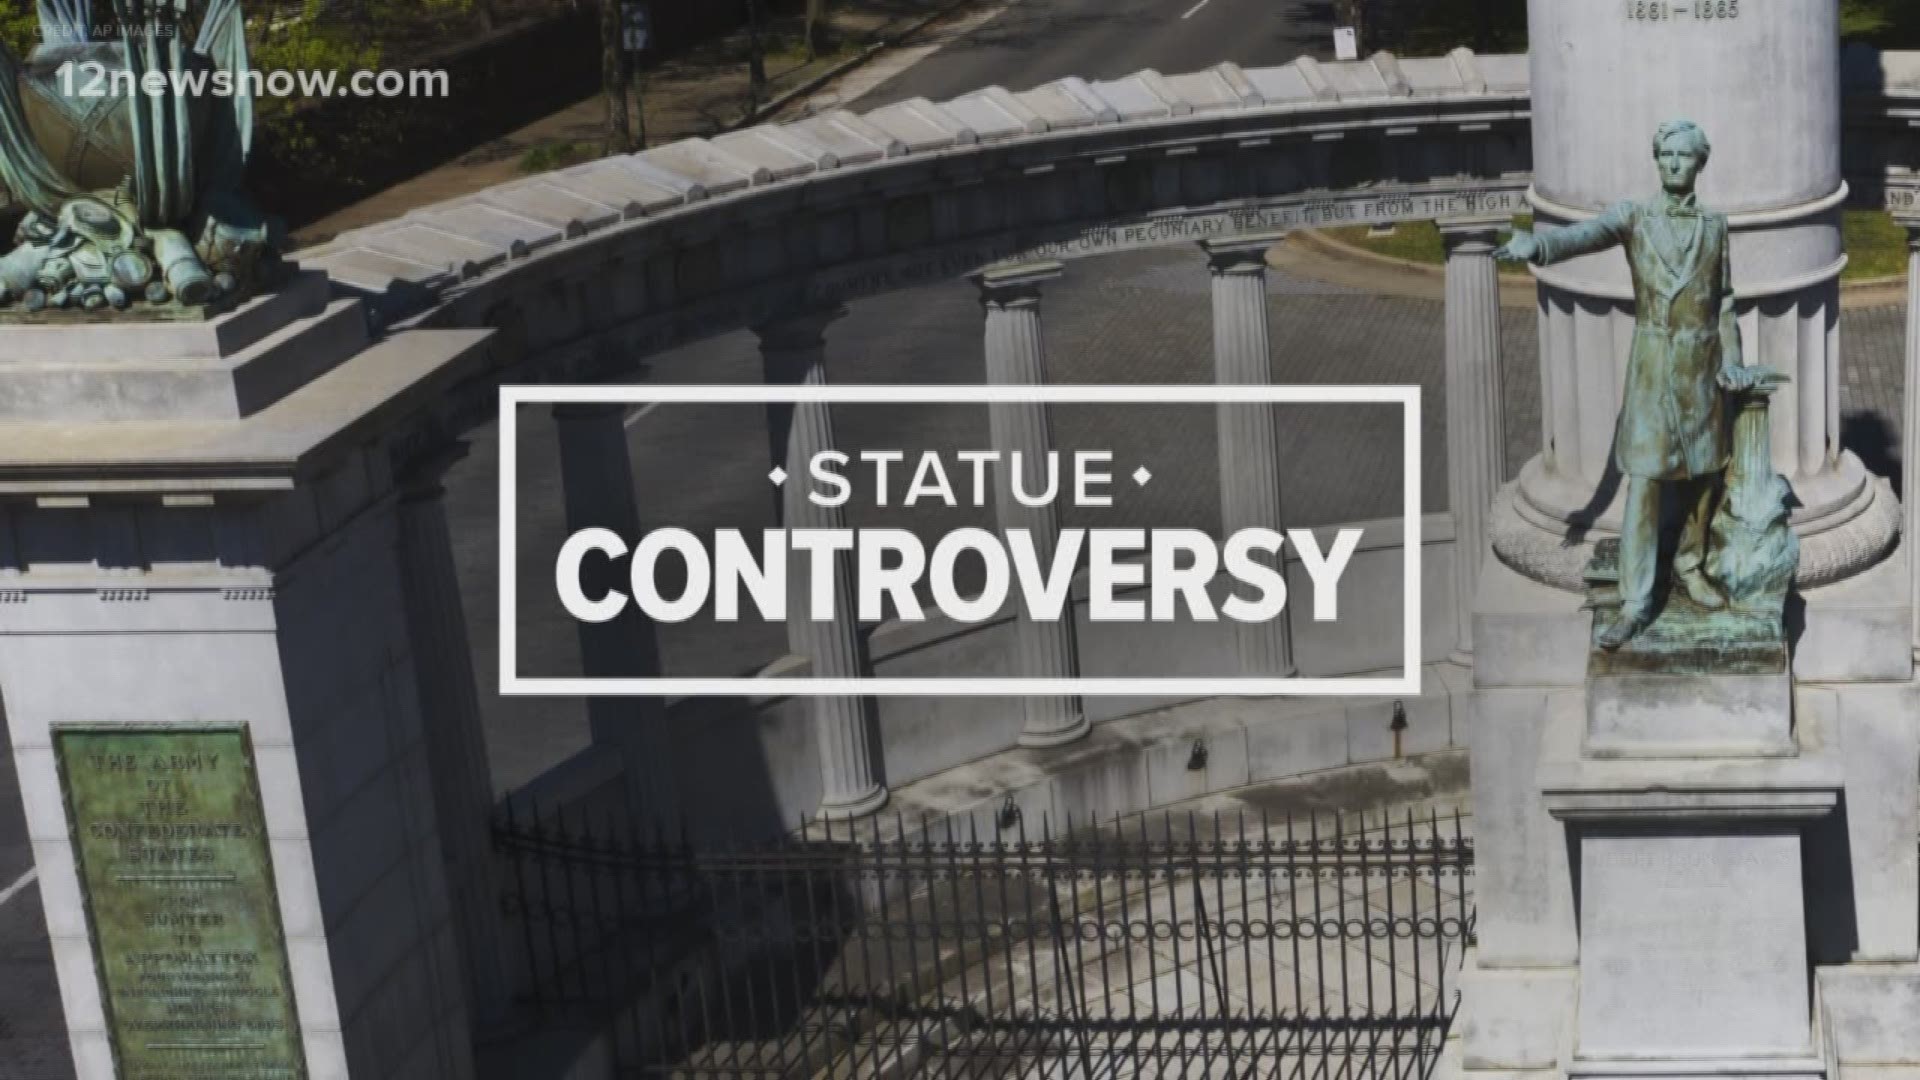 The Beaumont City Council voted Tuesday to remove a Confederate statue that has sat in a downtown park since 1912.